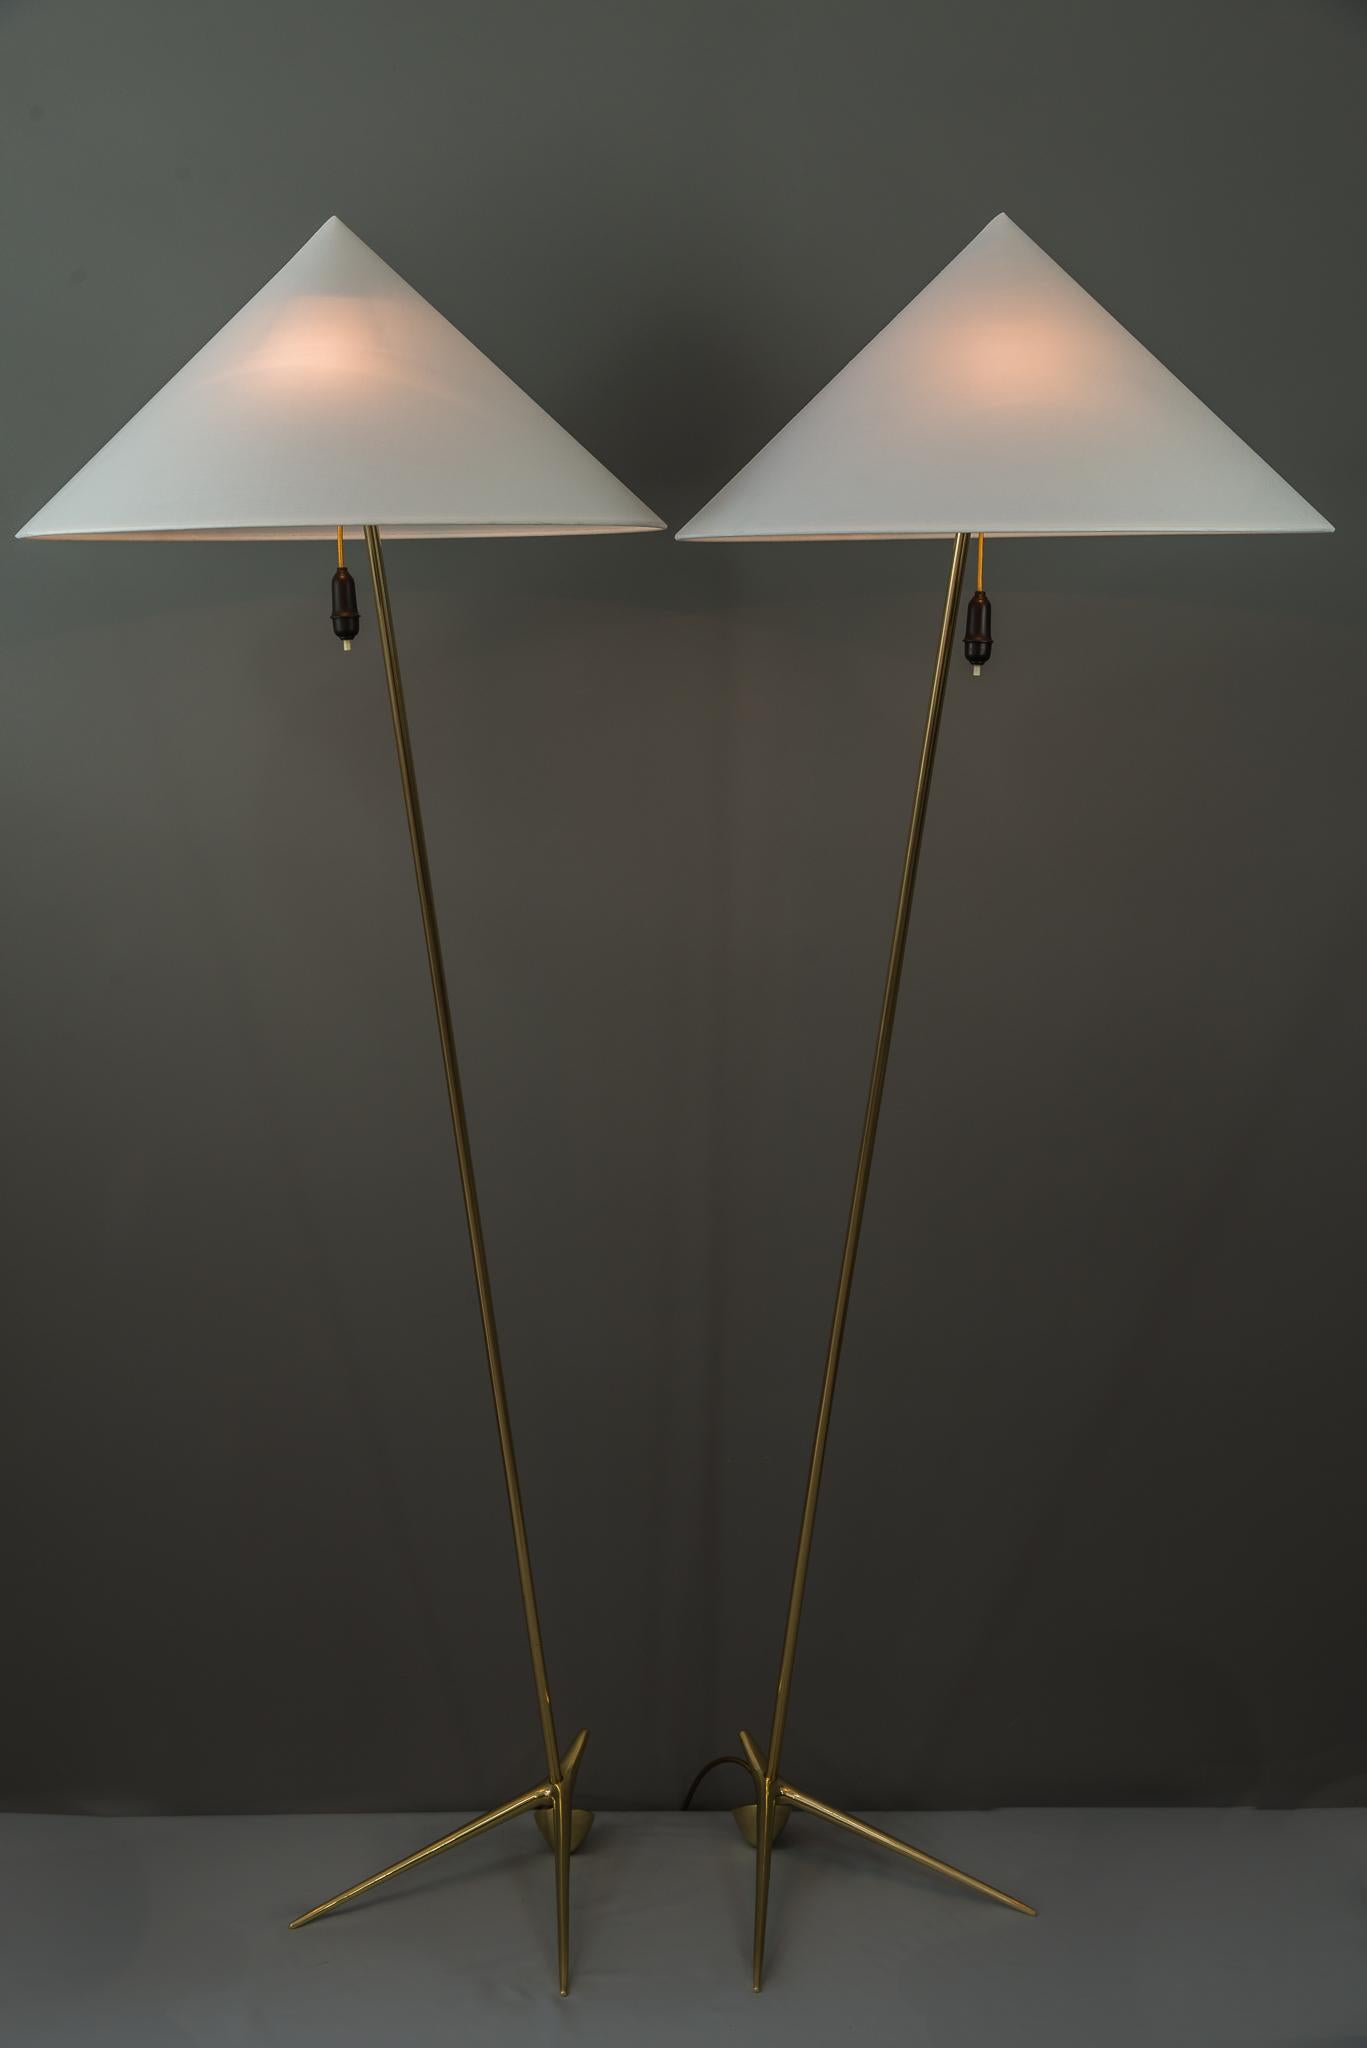 Two charming golf floor lamps, designed by Rupert Nikoll, Vienna, 1950
The lamp shades have been renewed as well based on the original dimensions.
Polished and stove enamelled
Pair price.